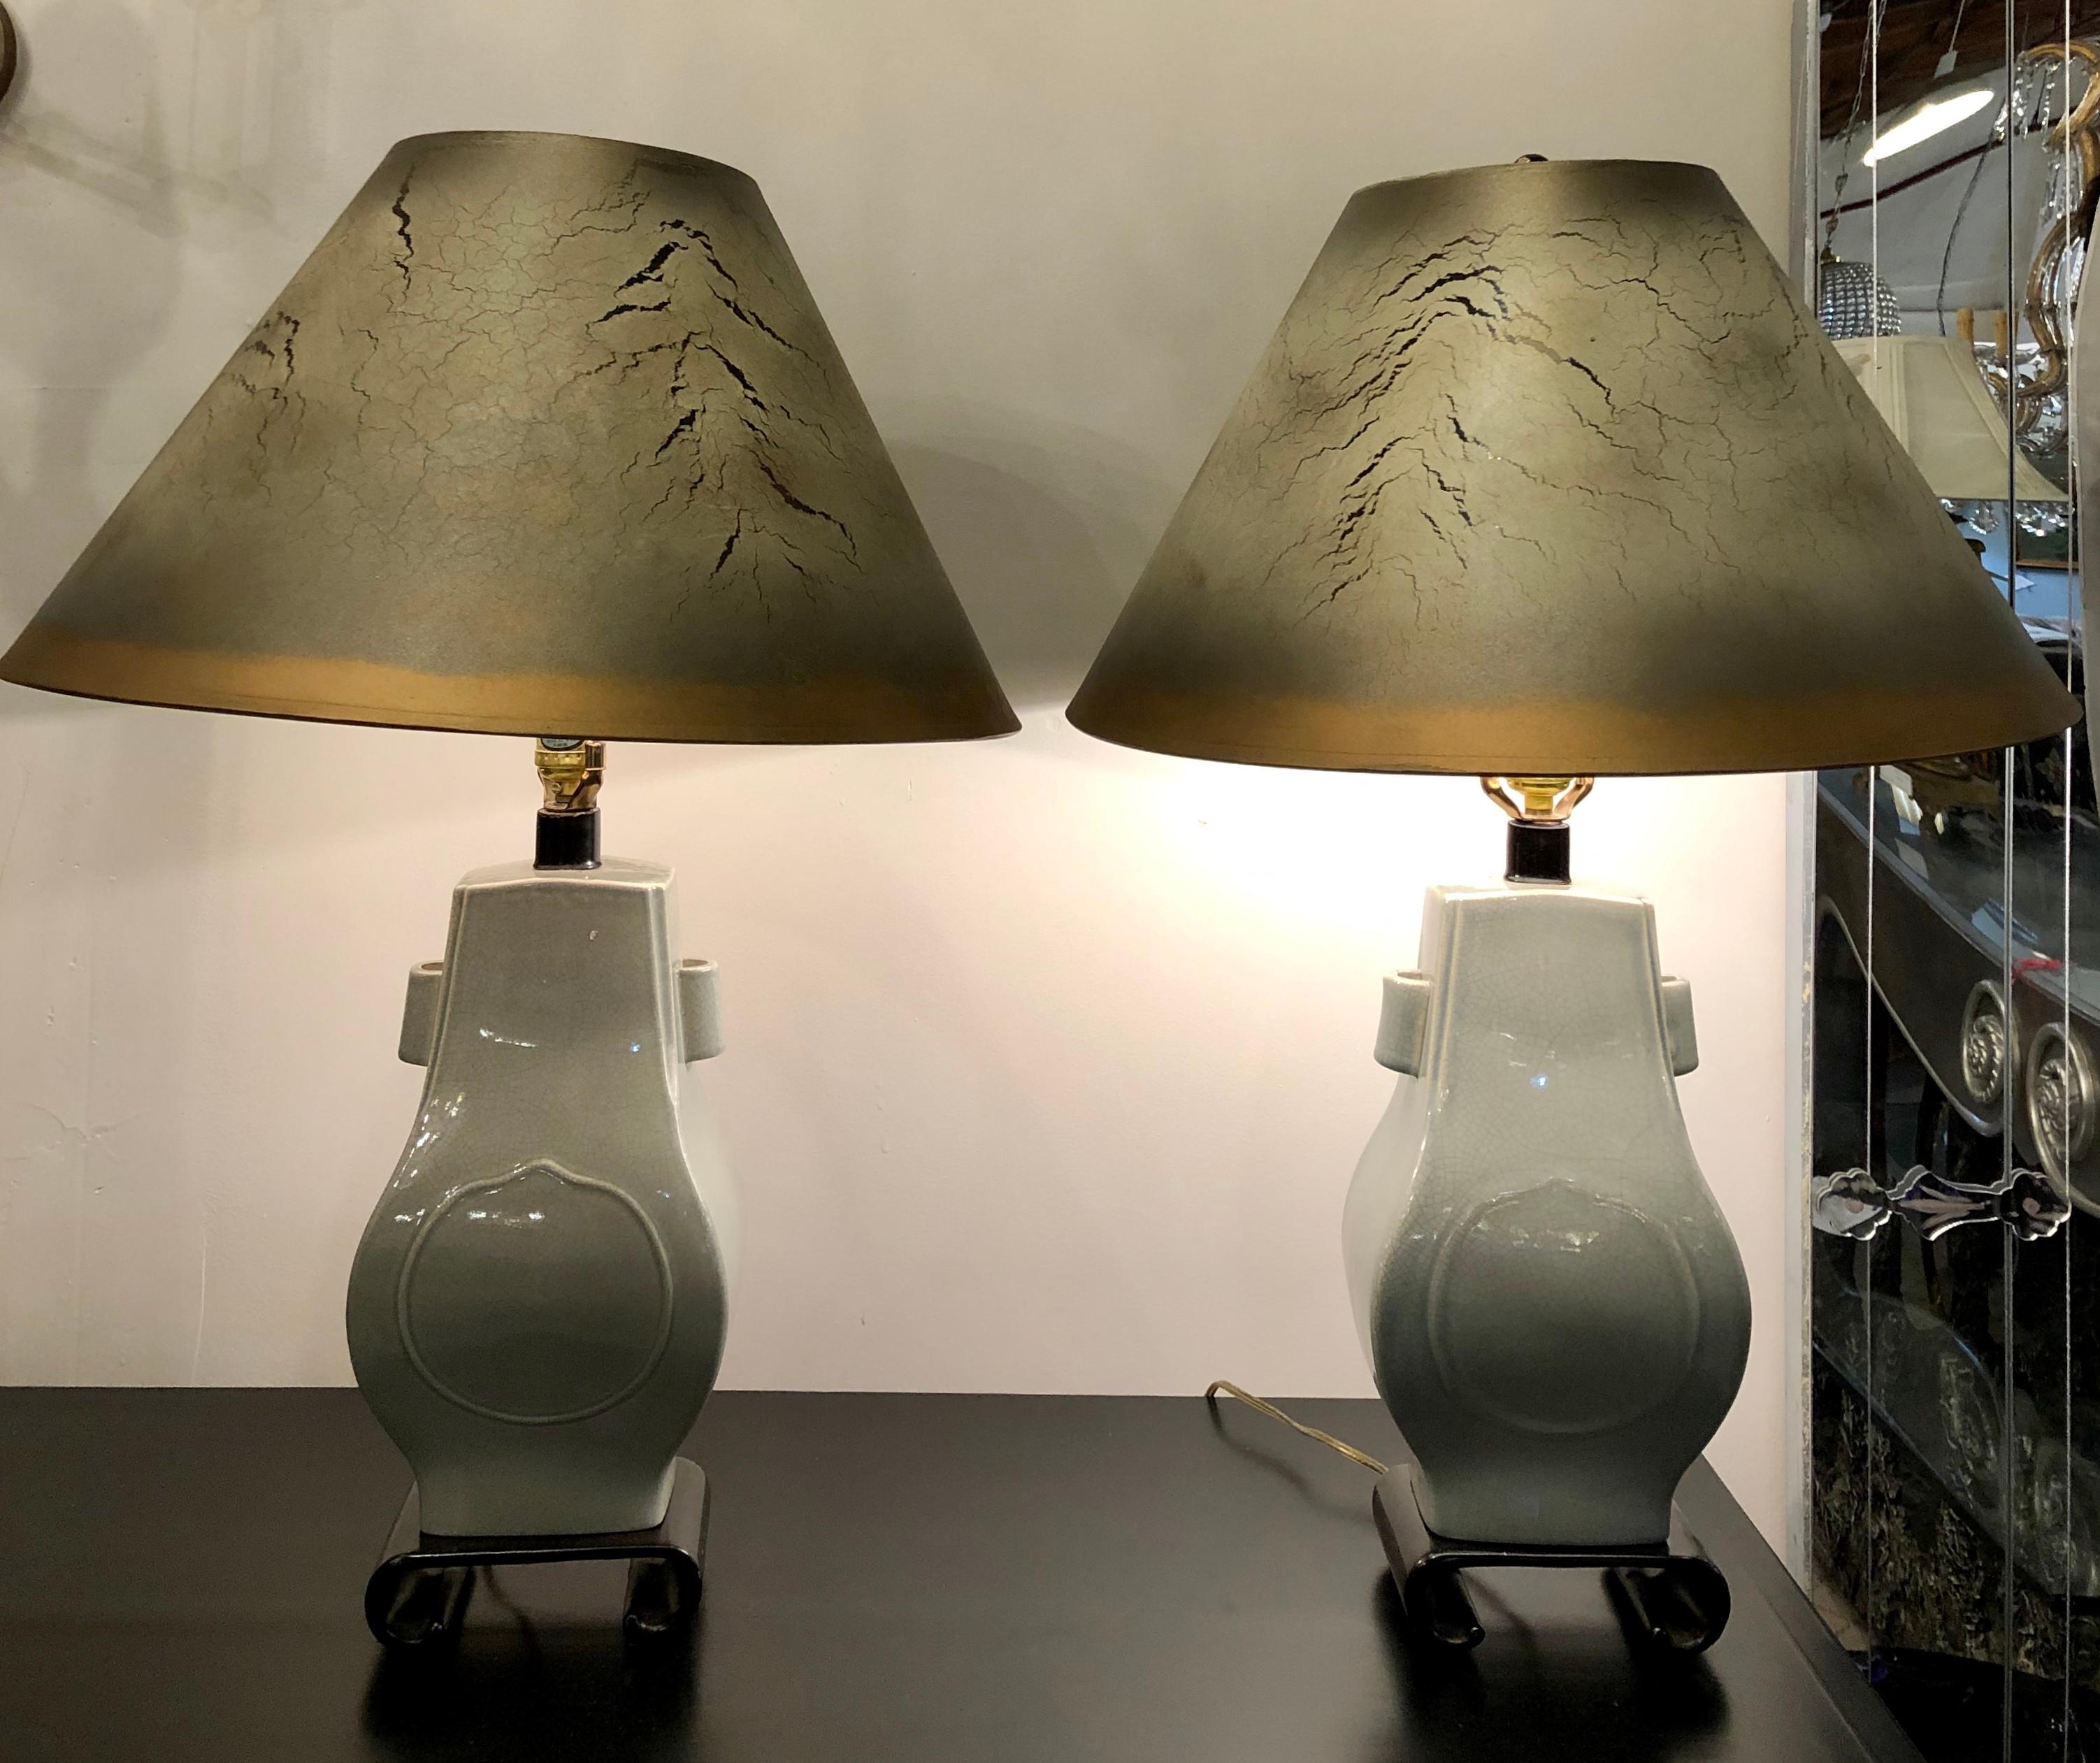 Porcelain crackle glaze table lamps. Chinese inspired pair of mint green table lamps each with a custom shade. The pair sitting on teak bases with matching crackle ware lamp shades.